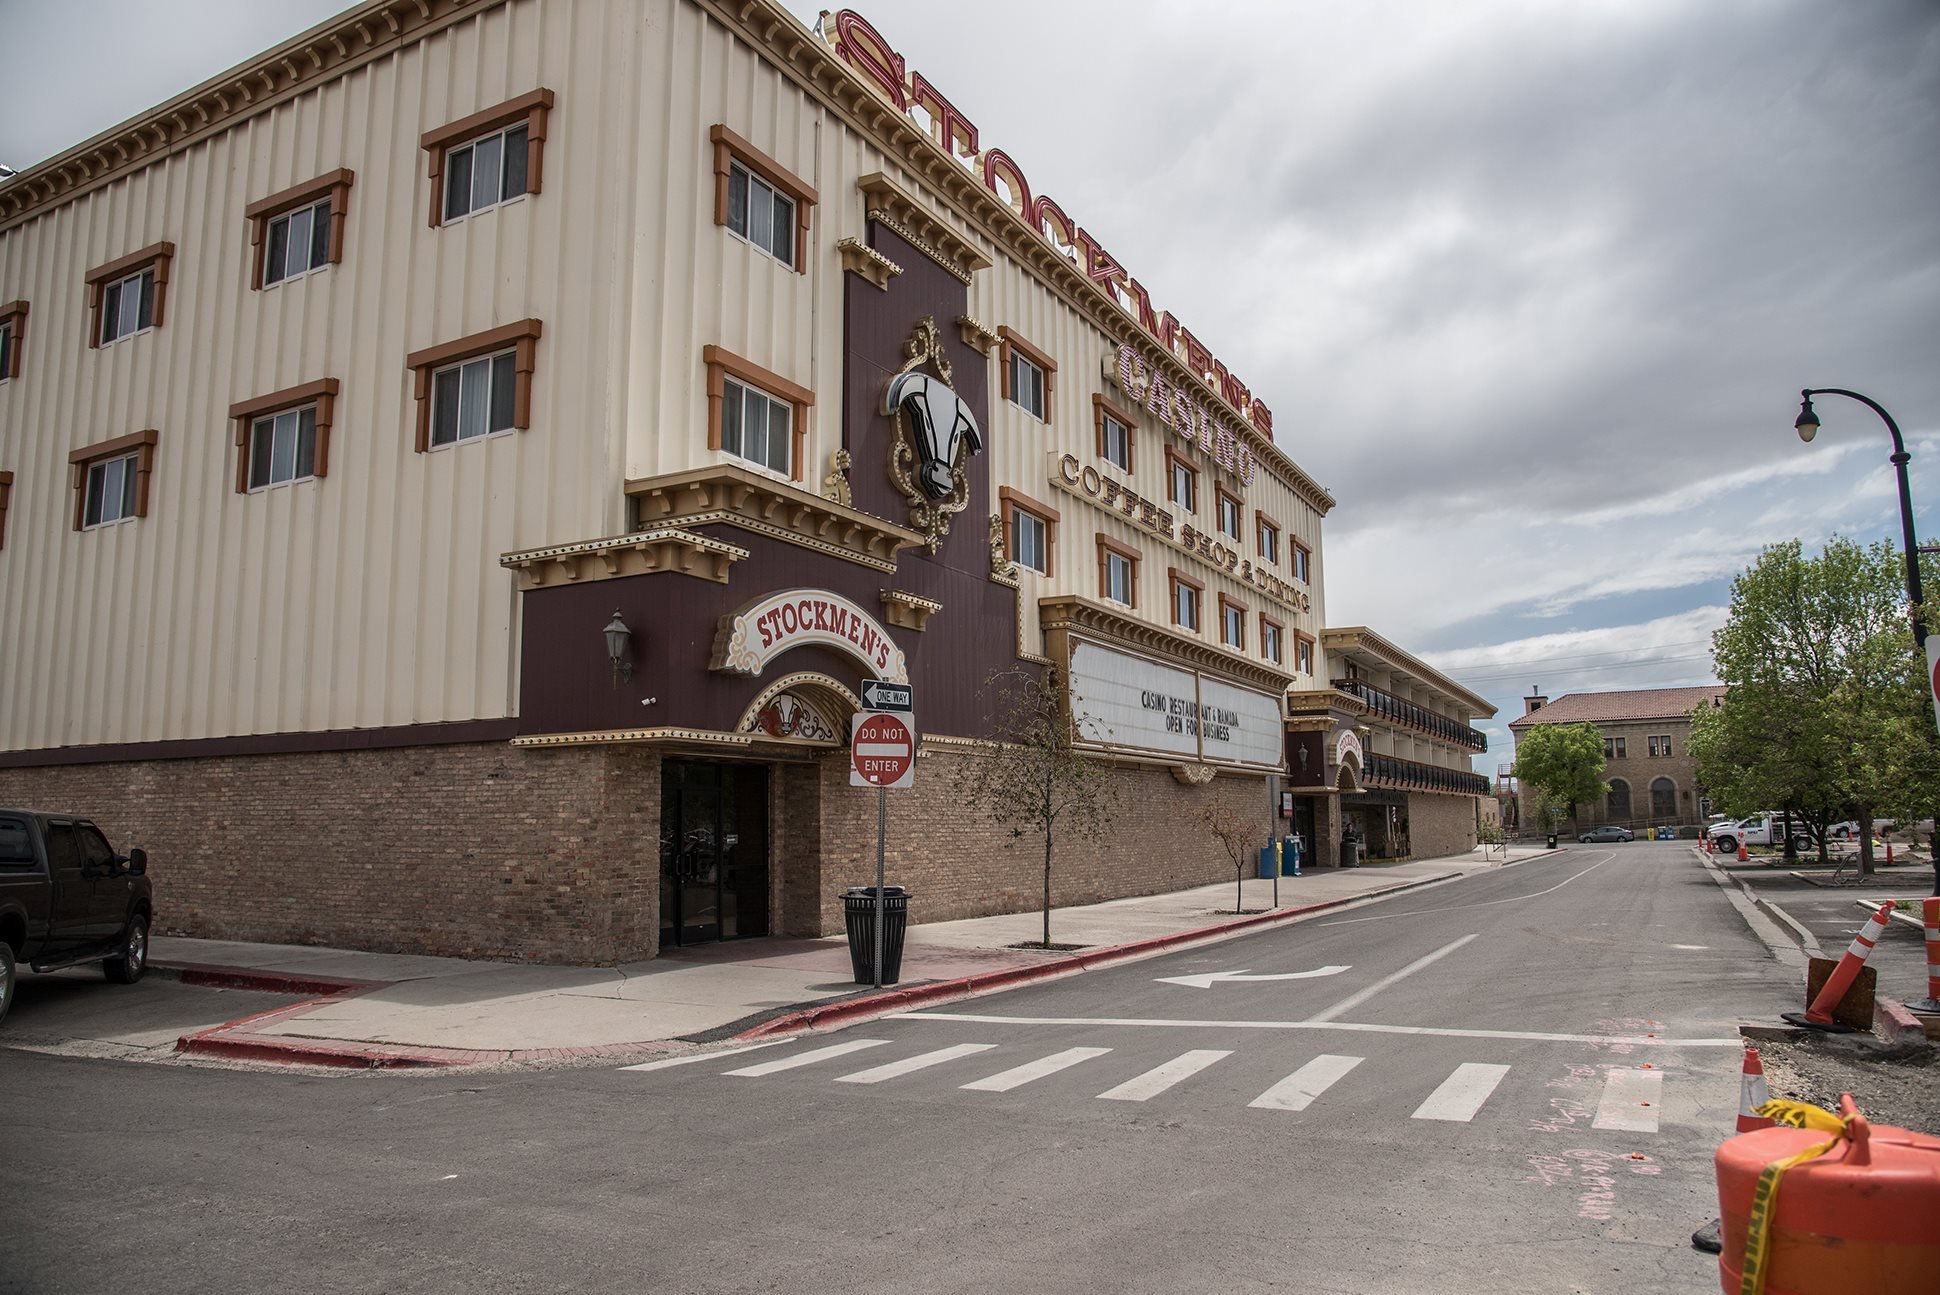 Stockmans Casino and Hotel Elko by Allusive Images.jpg